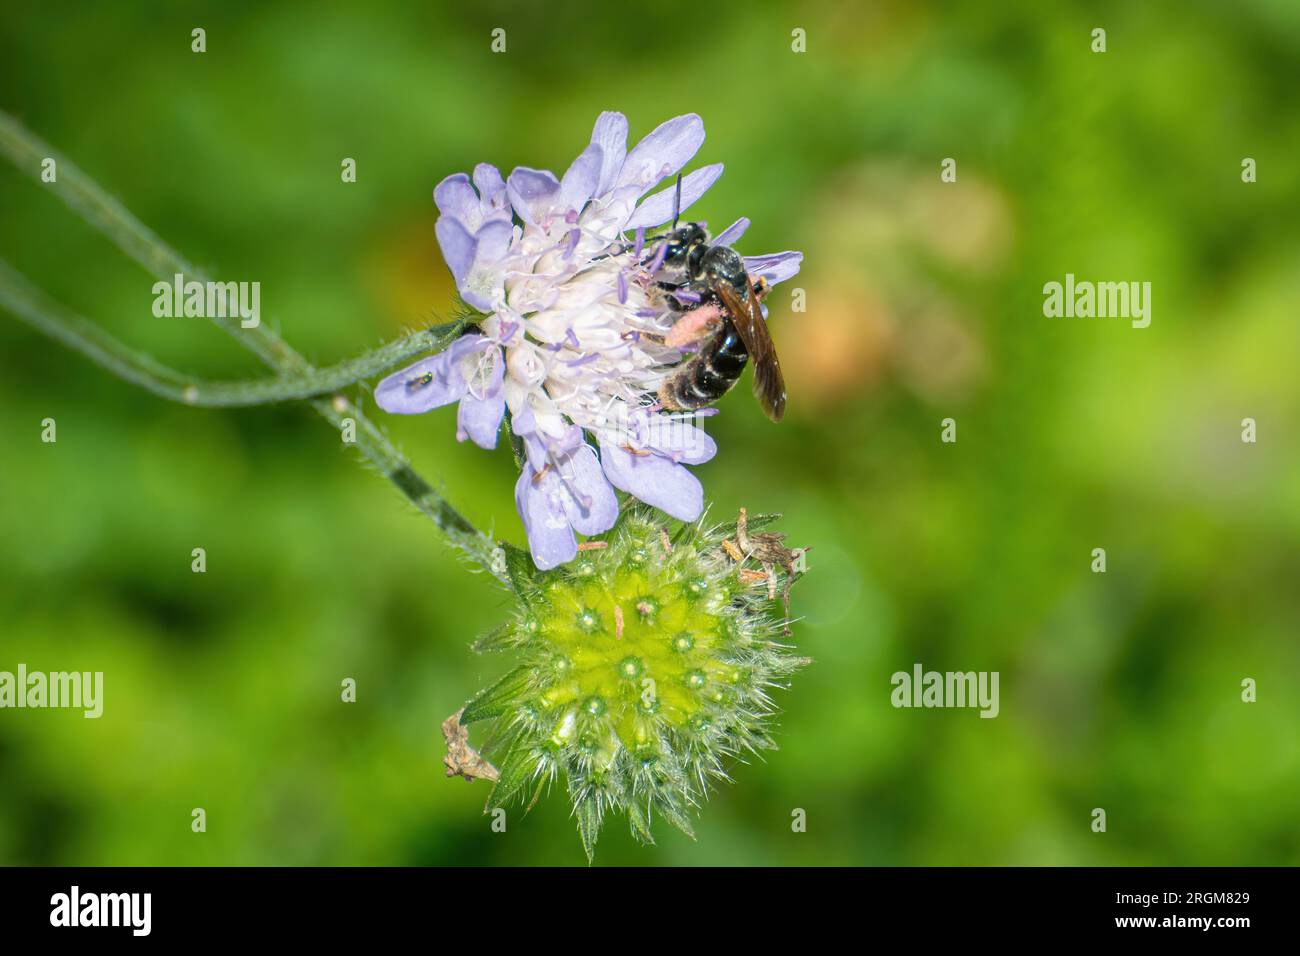 Large scabious mining bee (Andrena hattorfiana) with pink pollen grains on hind legs, on field scabious wildflower during summer, England, UK Stock Photo